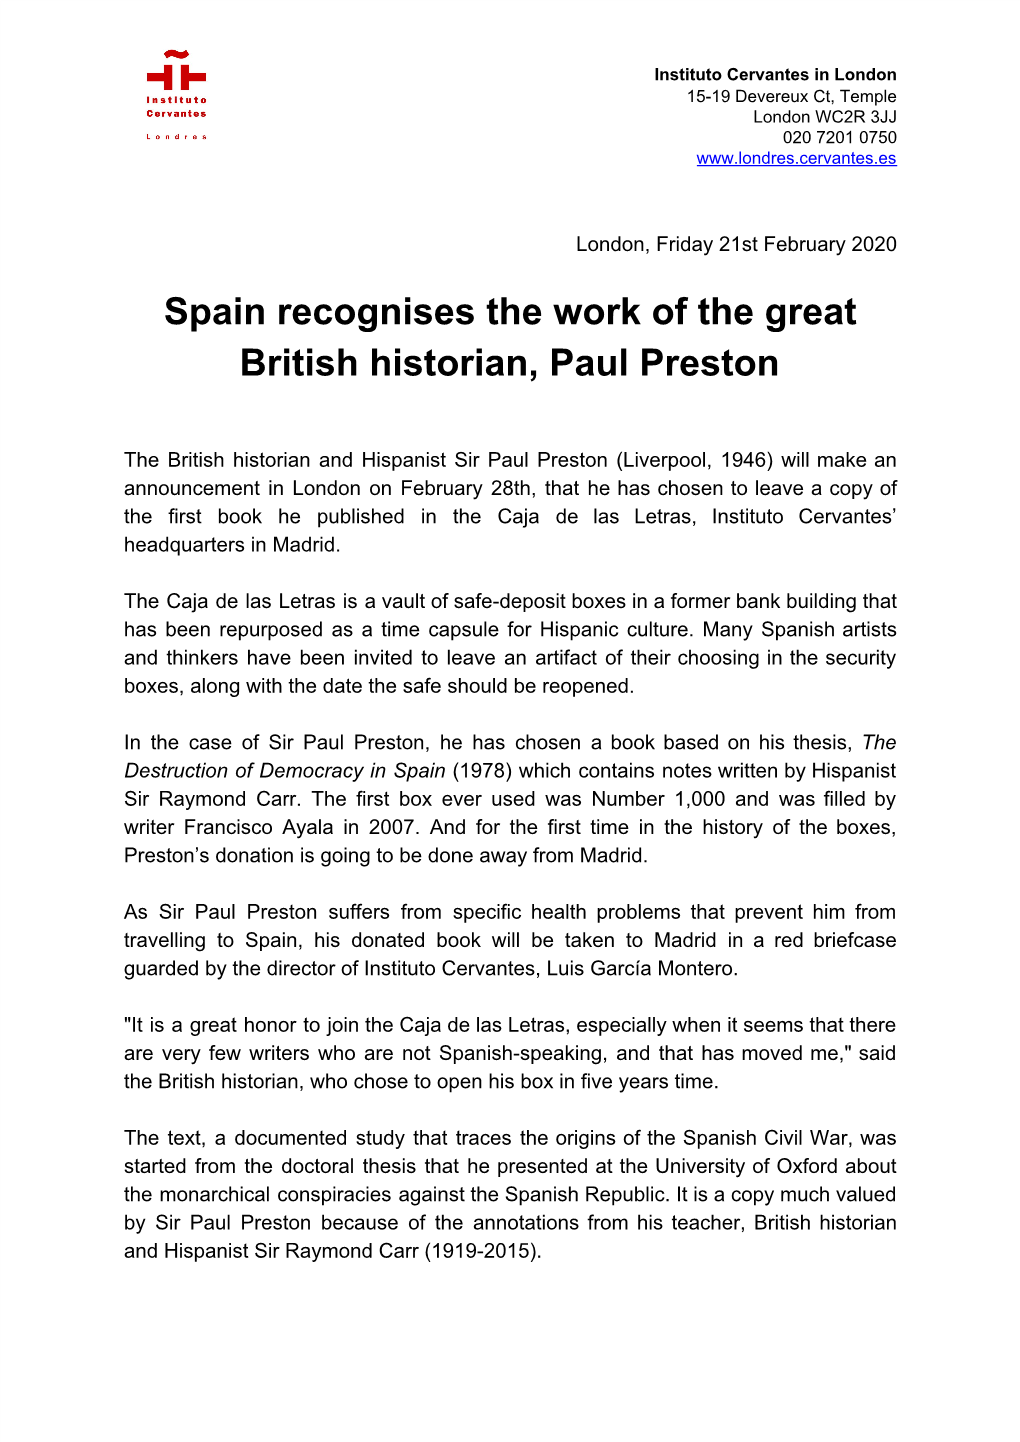 Spain Recognises the Work of the Great British Historian, Paul Preston